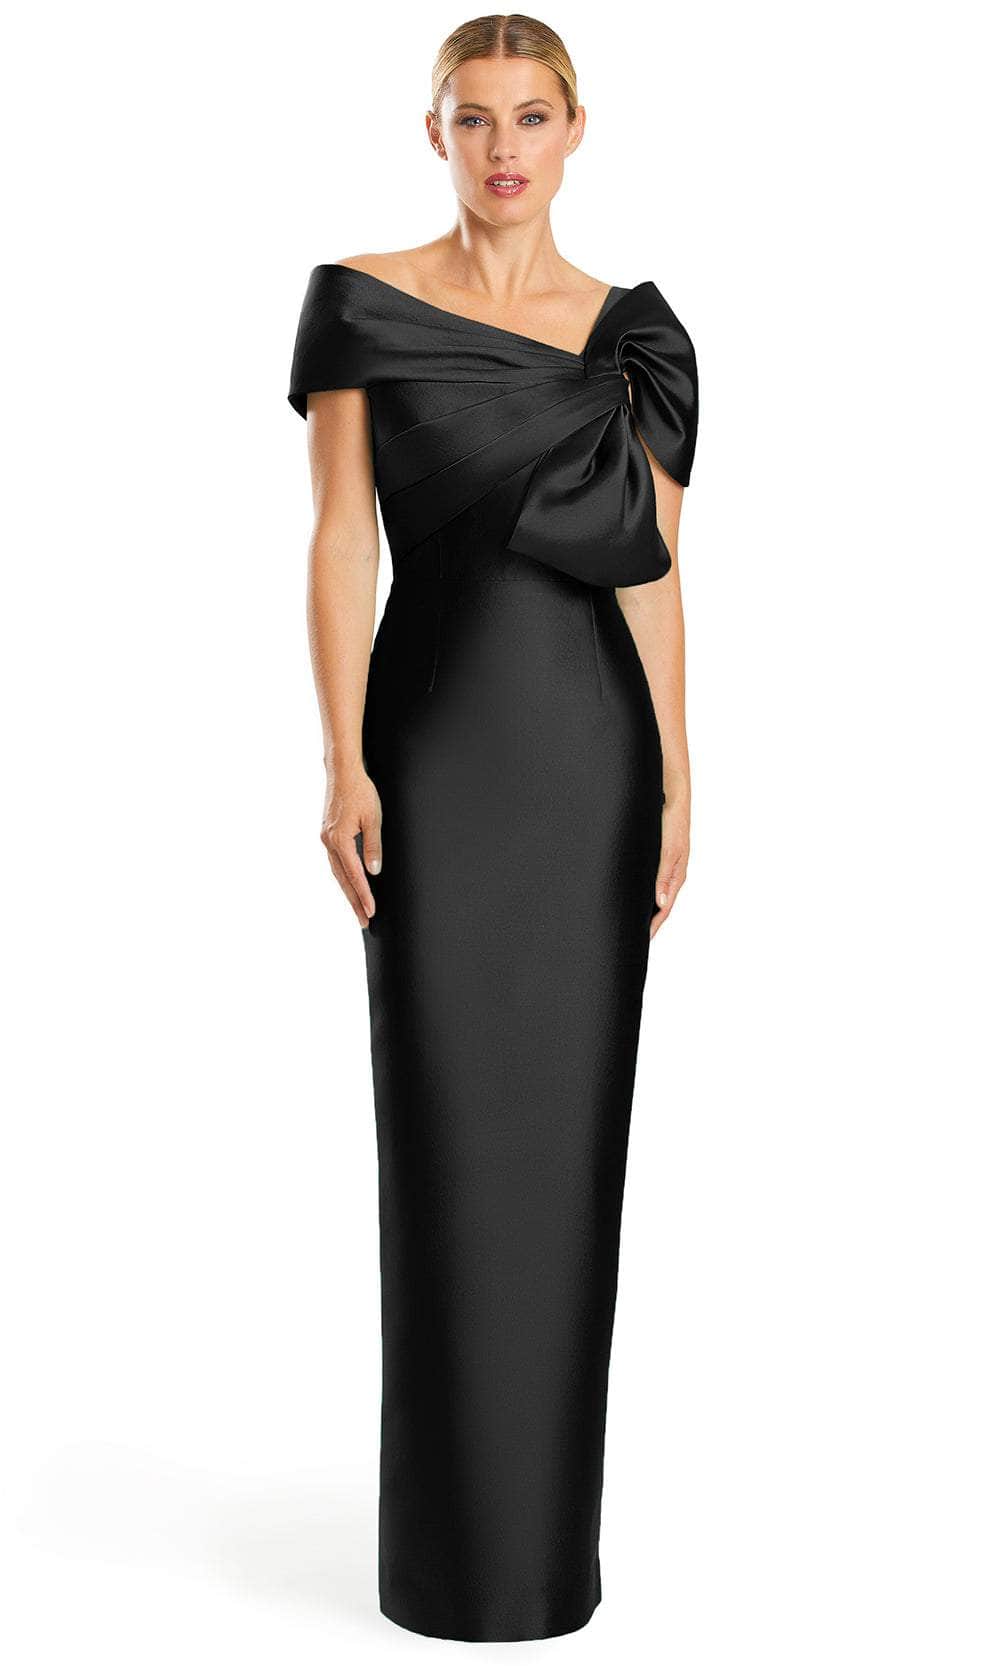 Image of Alexander by Daymor 1885F23 - Off-Shoulder Bow Accented Evening Dress